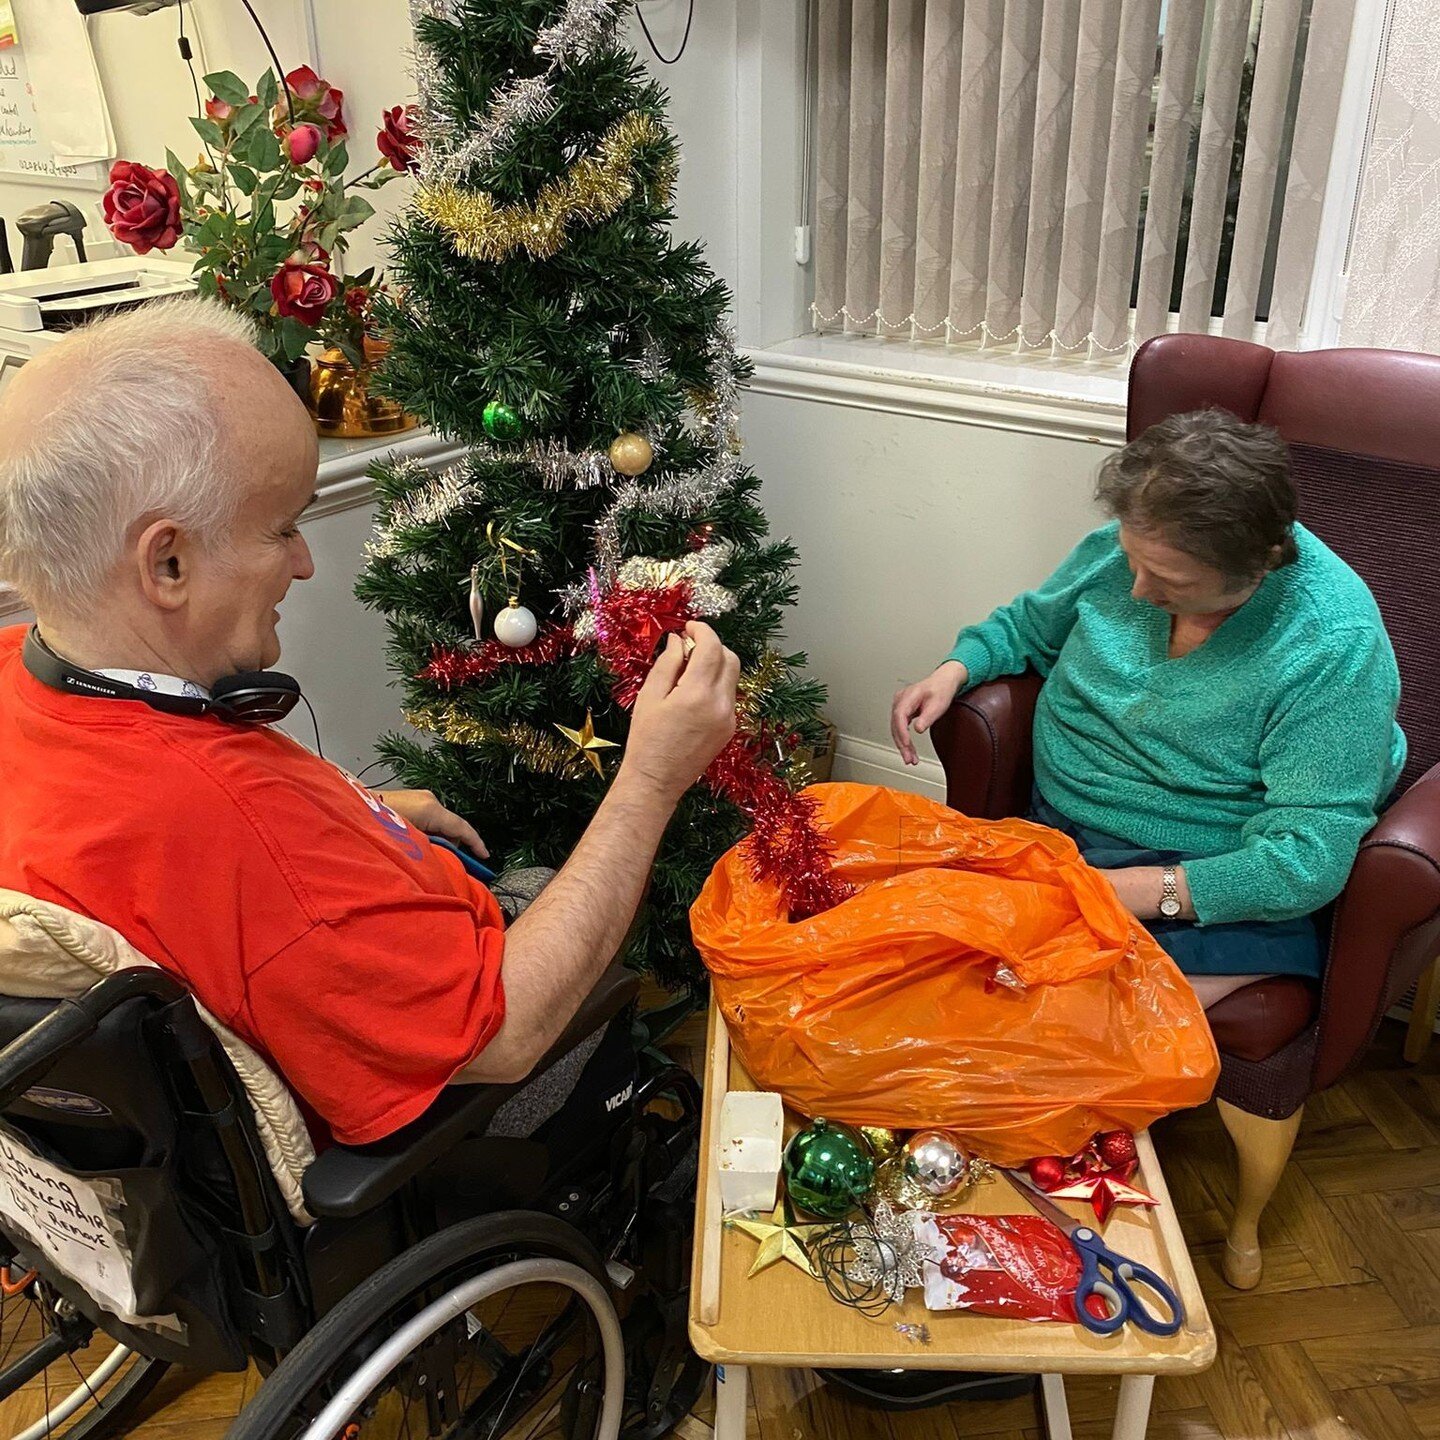 As it's getting close to the festive season, let's reminisce about last year's Christmas here at Chegworth. 🎄 

Our Residents love getting stuck in with activities, whether that be baking, arts and crafts or tree decoration.

#ChegworthNursingHome